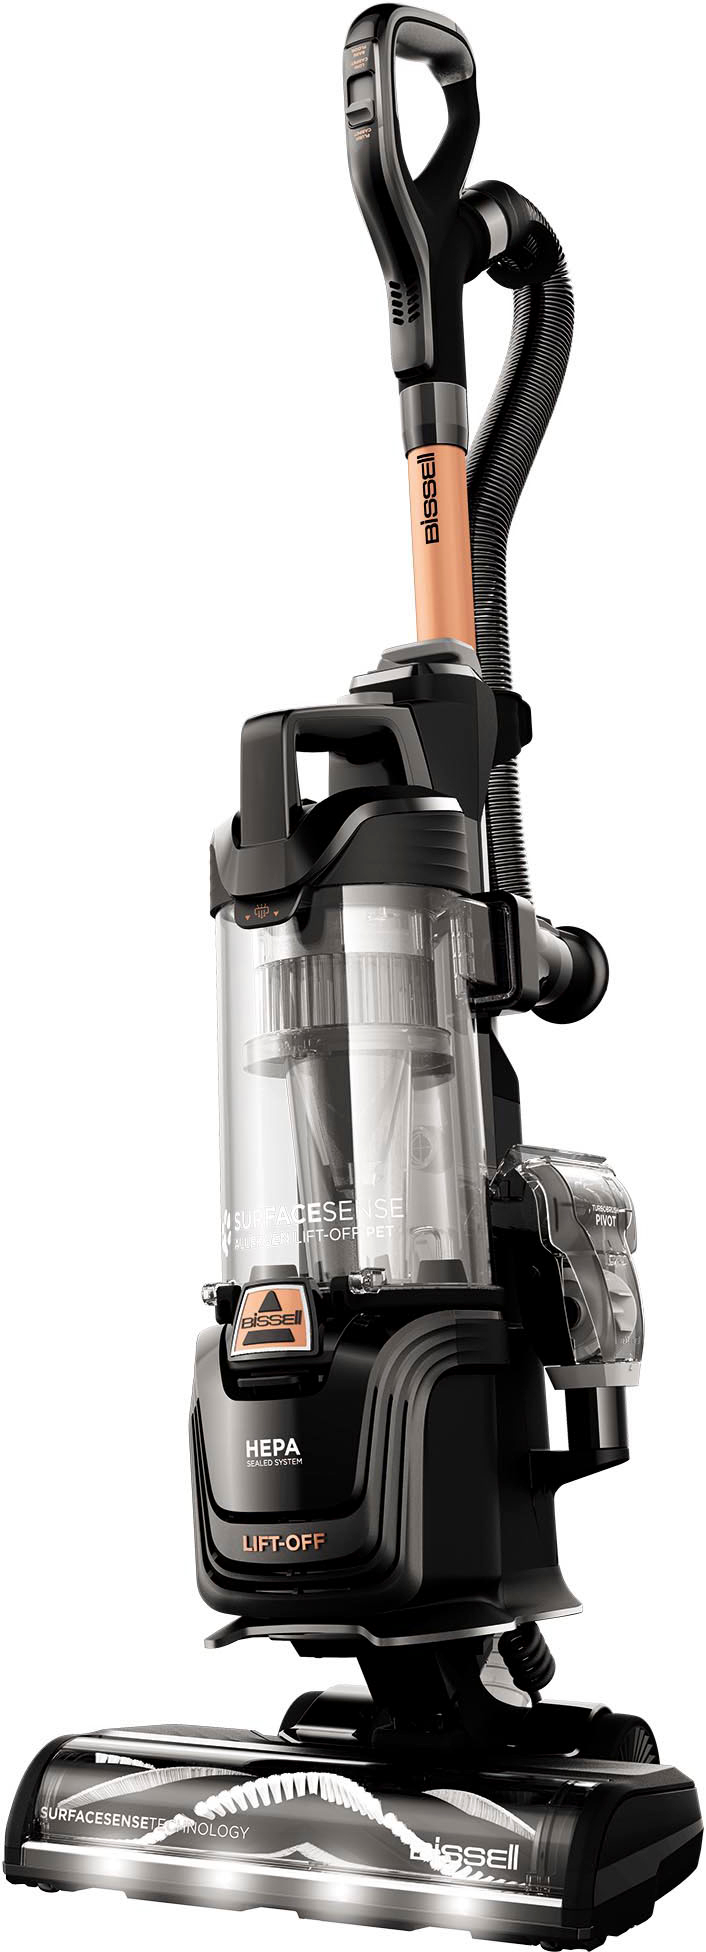 Angle View: BISSELL - SurfaceSense Allergen Pet Lift-Off Upright Vacuum - Black